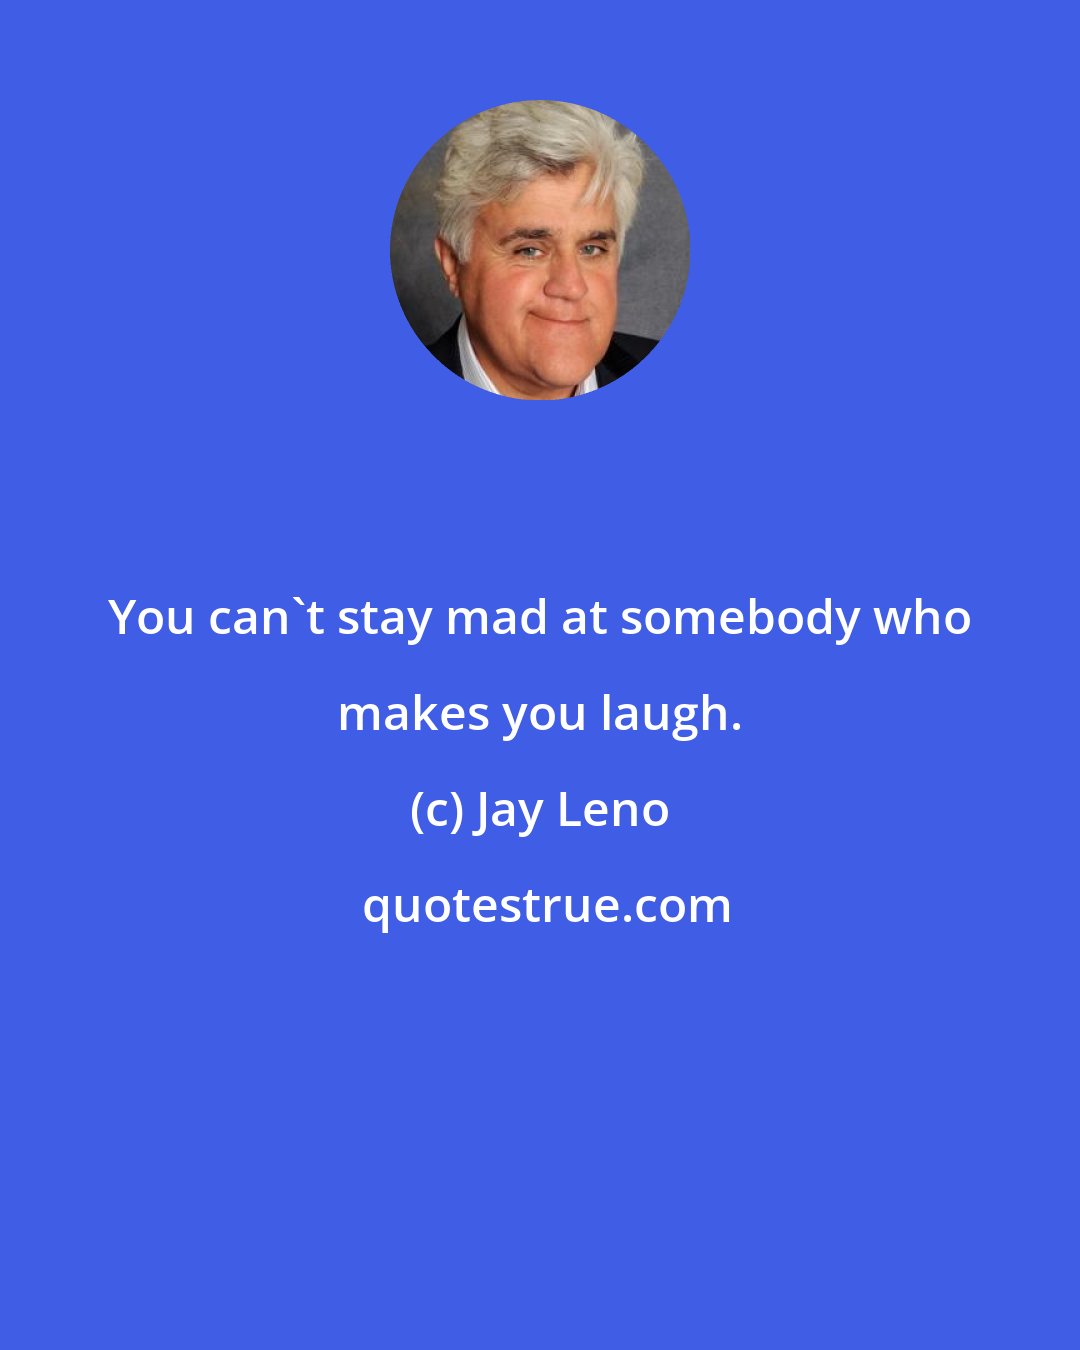 Jay Leno: You can't stay mad at somebody who makes you laugh.